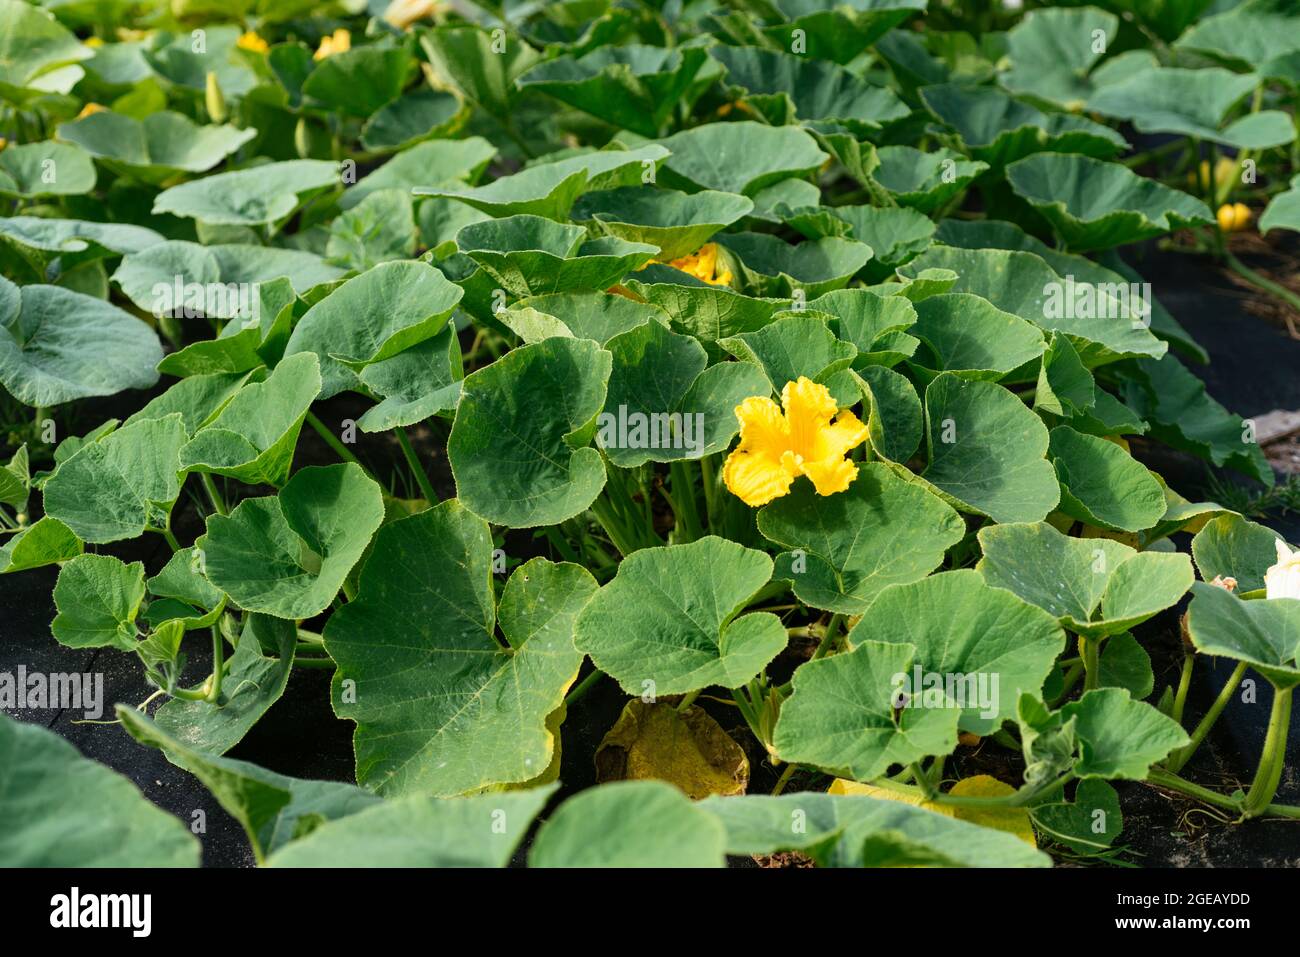 Squash patch with flowering red kuri squash plants in a vegetable garden. Stock Photo